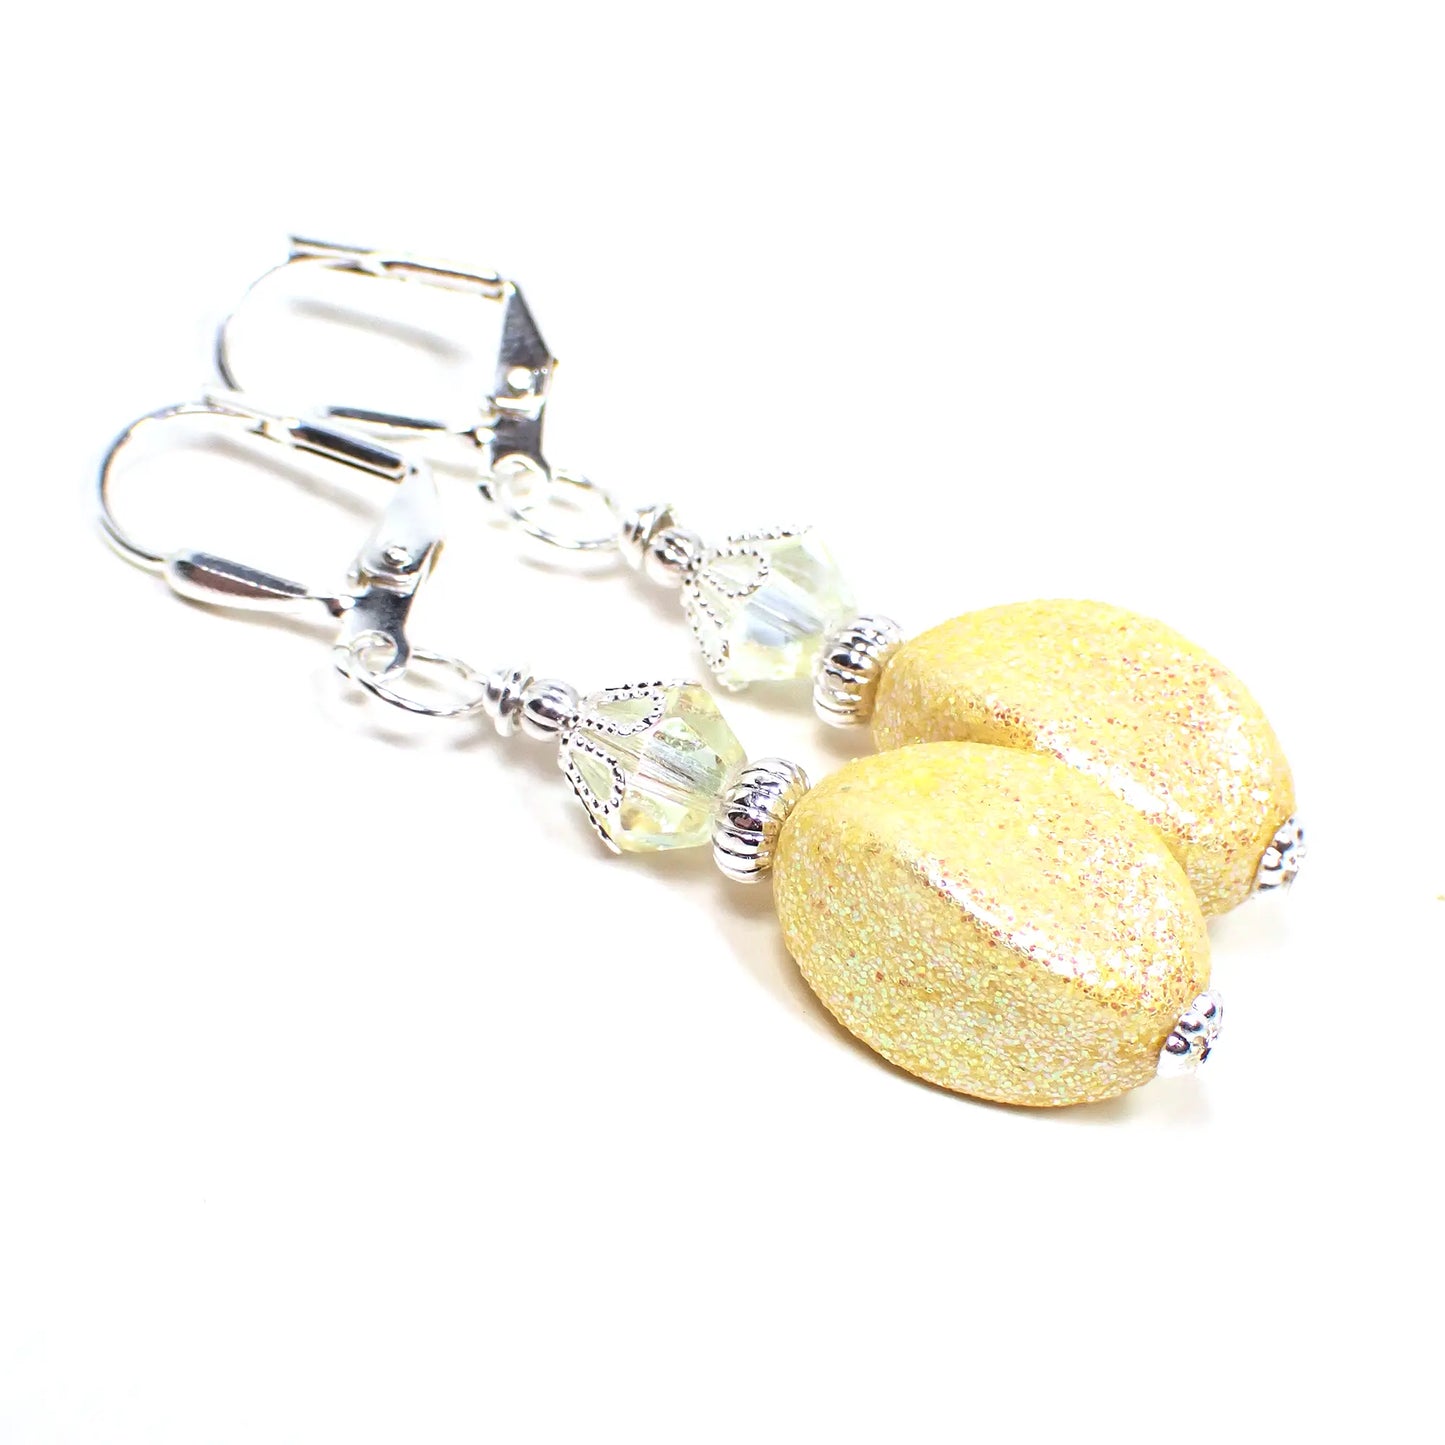 Angled view of the handmade drop earrings with vintage acrylic glitter beads. The metal is bright silver in color. There are light yellow faceted crystal glass beads at the top. The bottom acrylic beads are a twisted oval like shape and light yellow in color with tiny flecks of iridescent glitter.